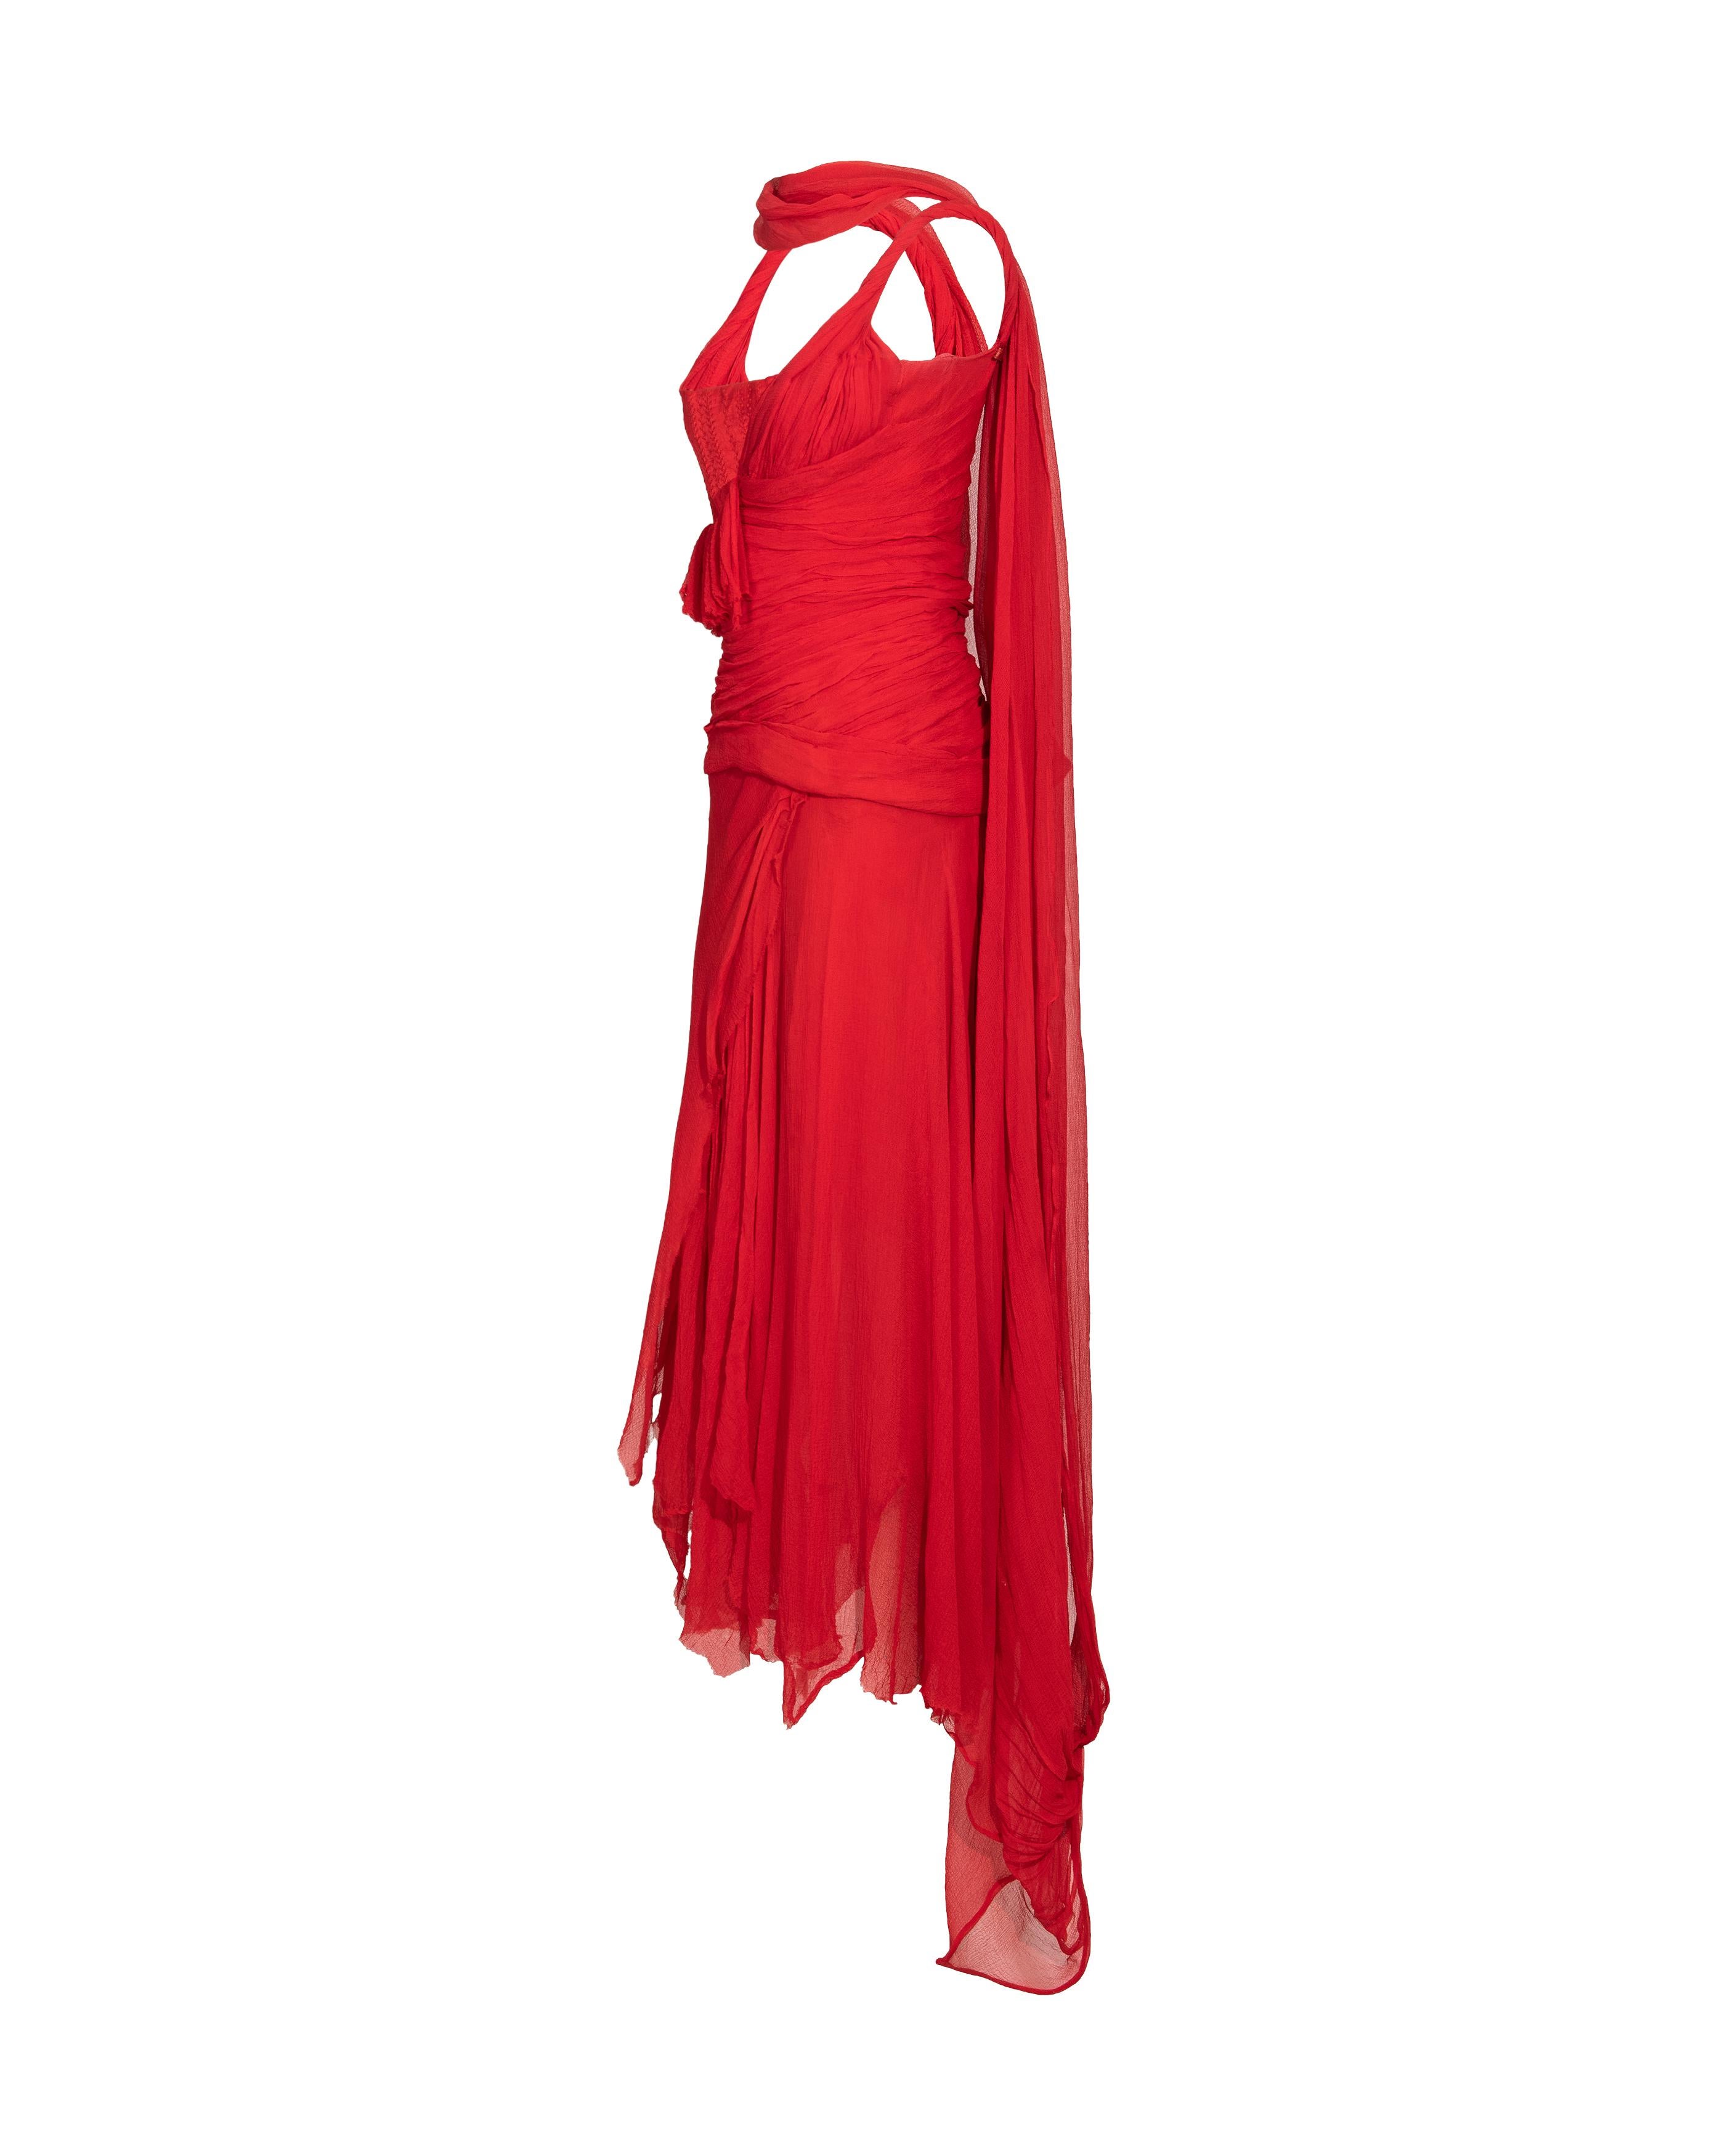 Women's S/S 2003 Alexander McQueen  'Irere' Collection Red Silk Chiffon Gown with Sash For Sale